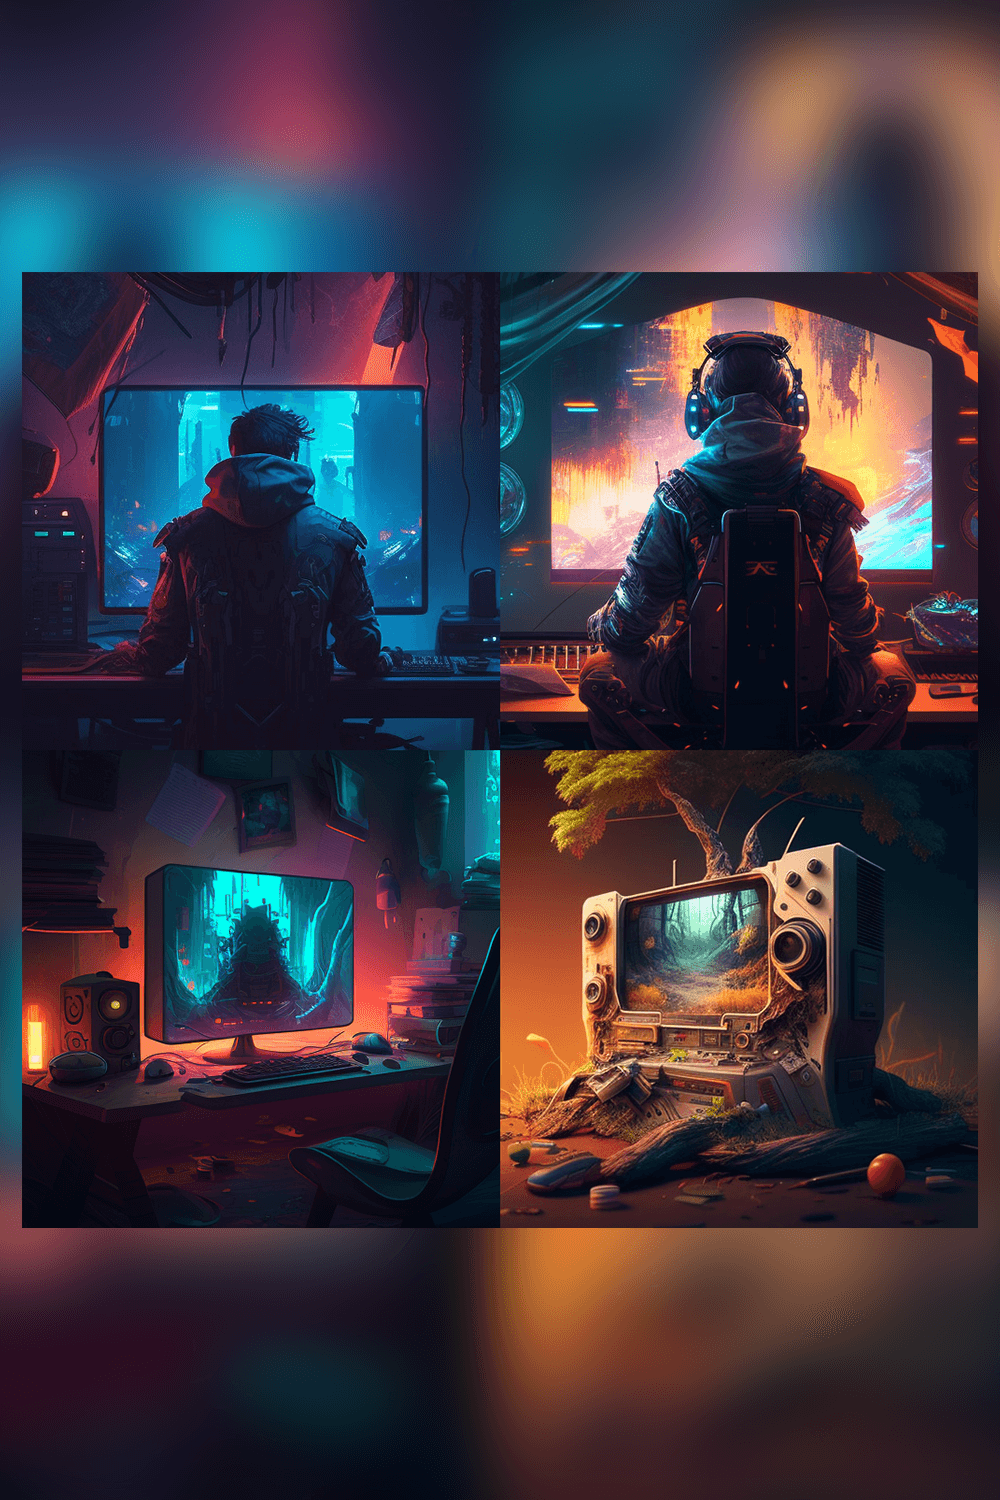 Series of photos of a man sitting in front of a computer monitor.